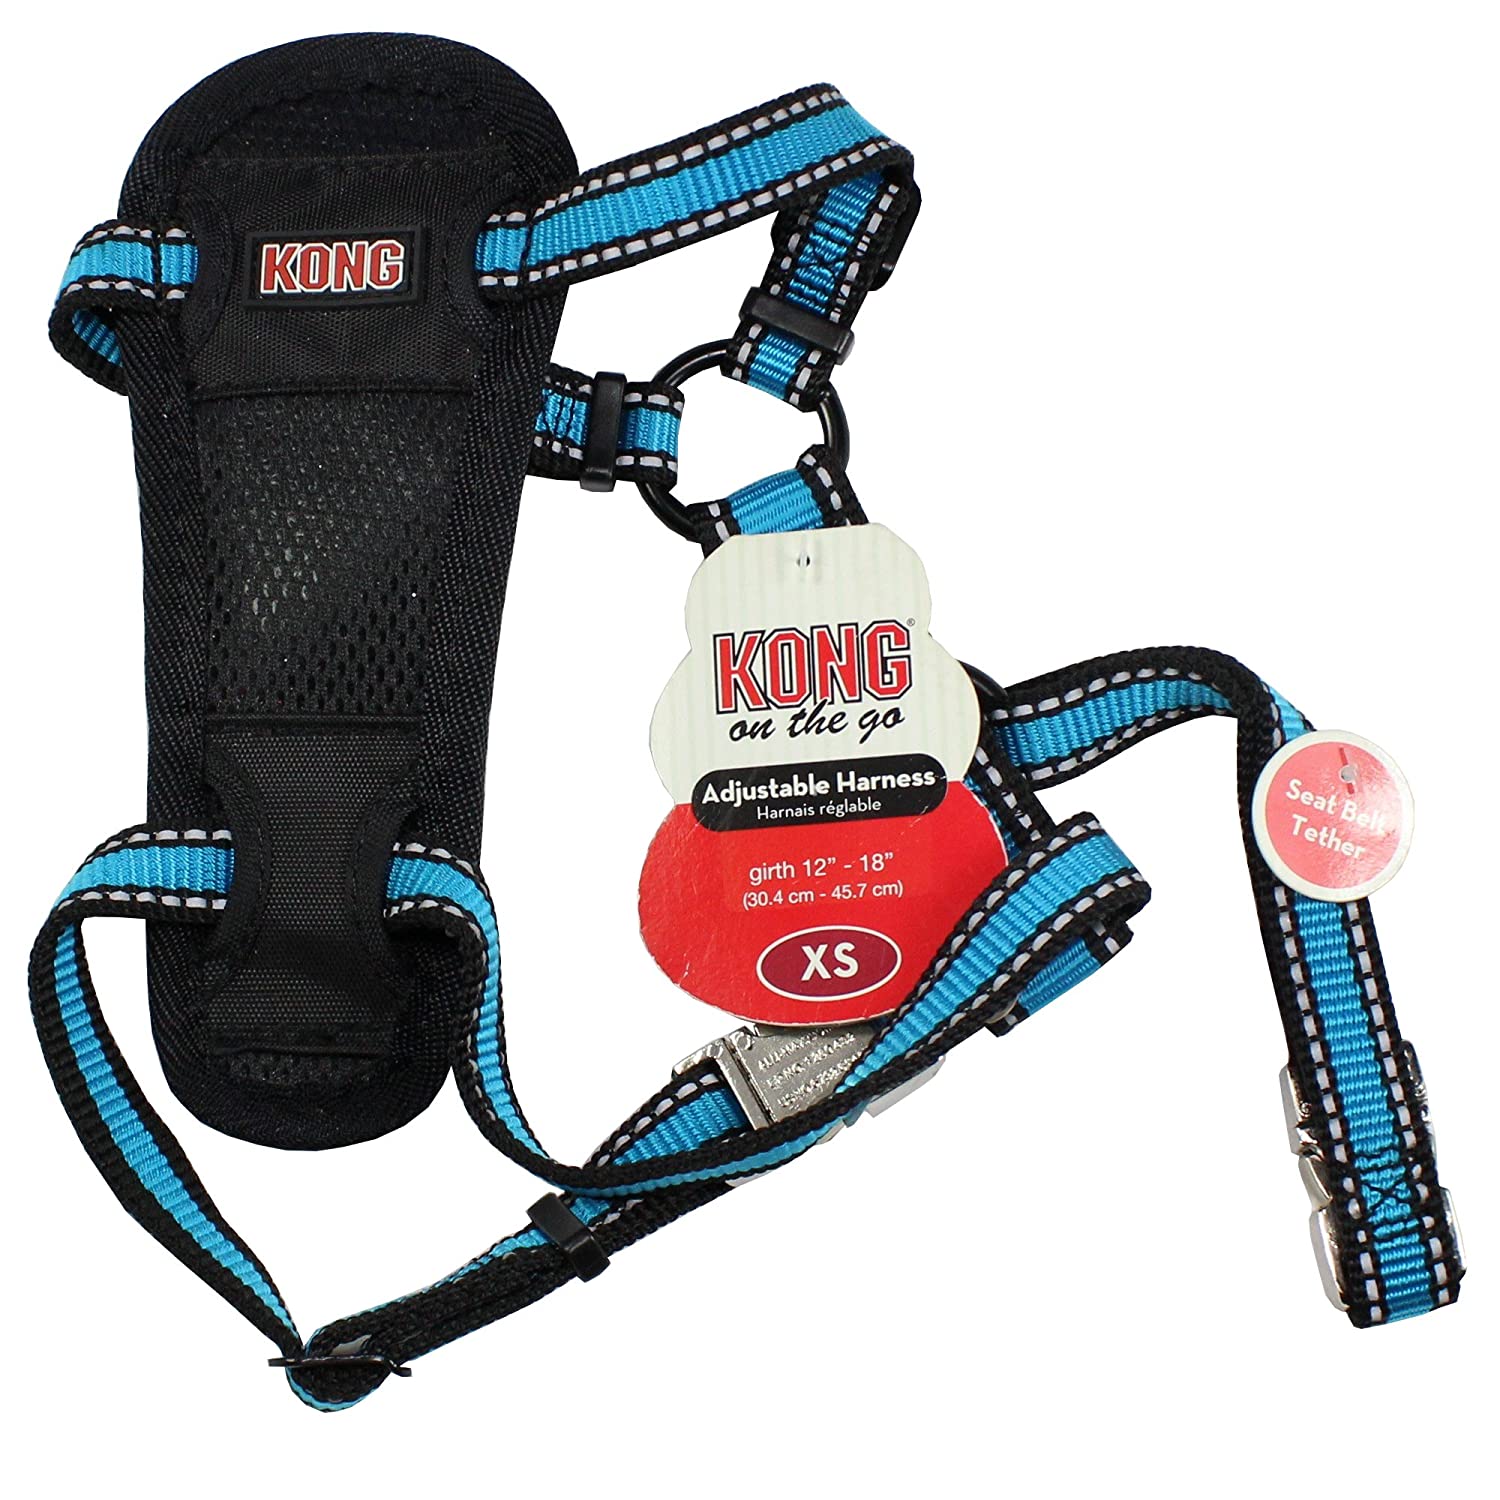 Kong Adjustable Harness with Seat Belt Attachment